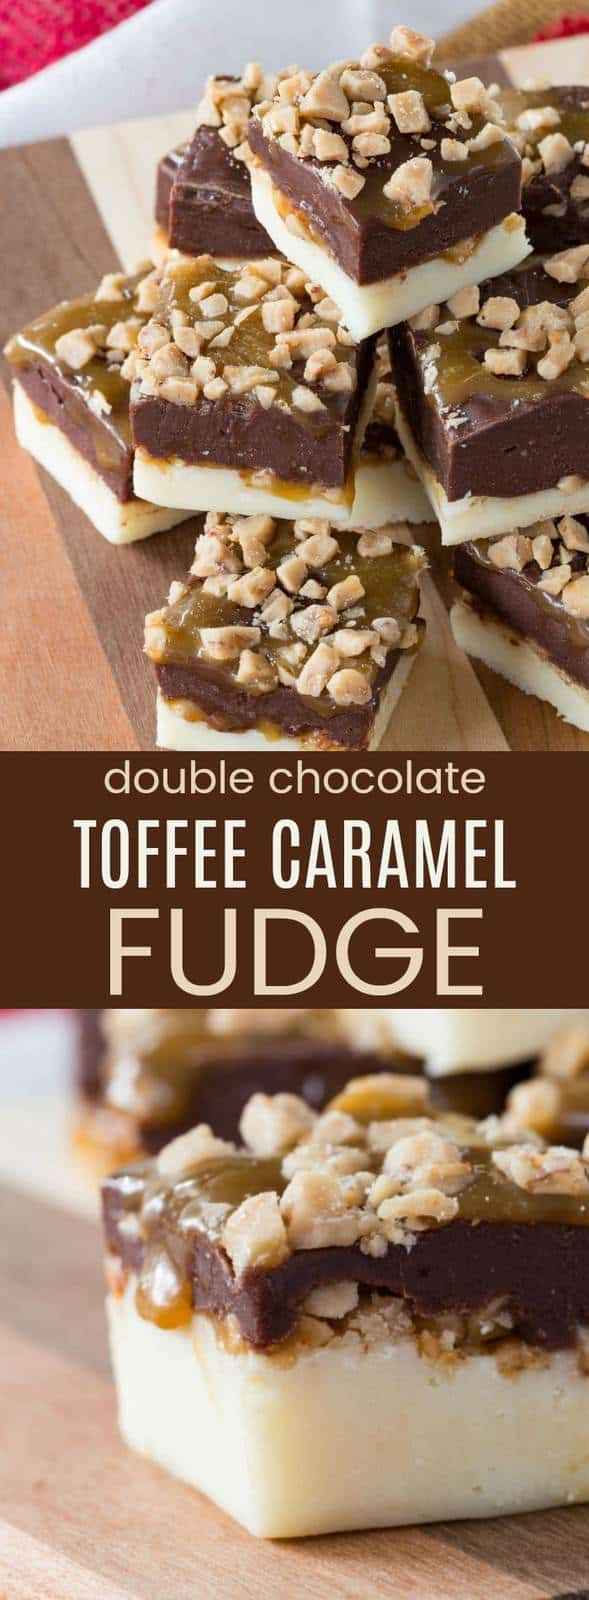 Double Chocolate Toffee Caramel Fudge - an easy microwave fudge recipe with layers of white and dark chocolate, gooey caramel, and bits of toffee. This simple candy is the perfect no-bake dessert for the holidays or any day. #fudge #fudgerecipe #chocolate #christmas #christmascandy #glutenfree